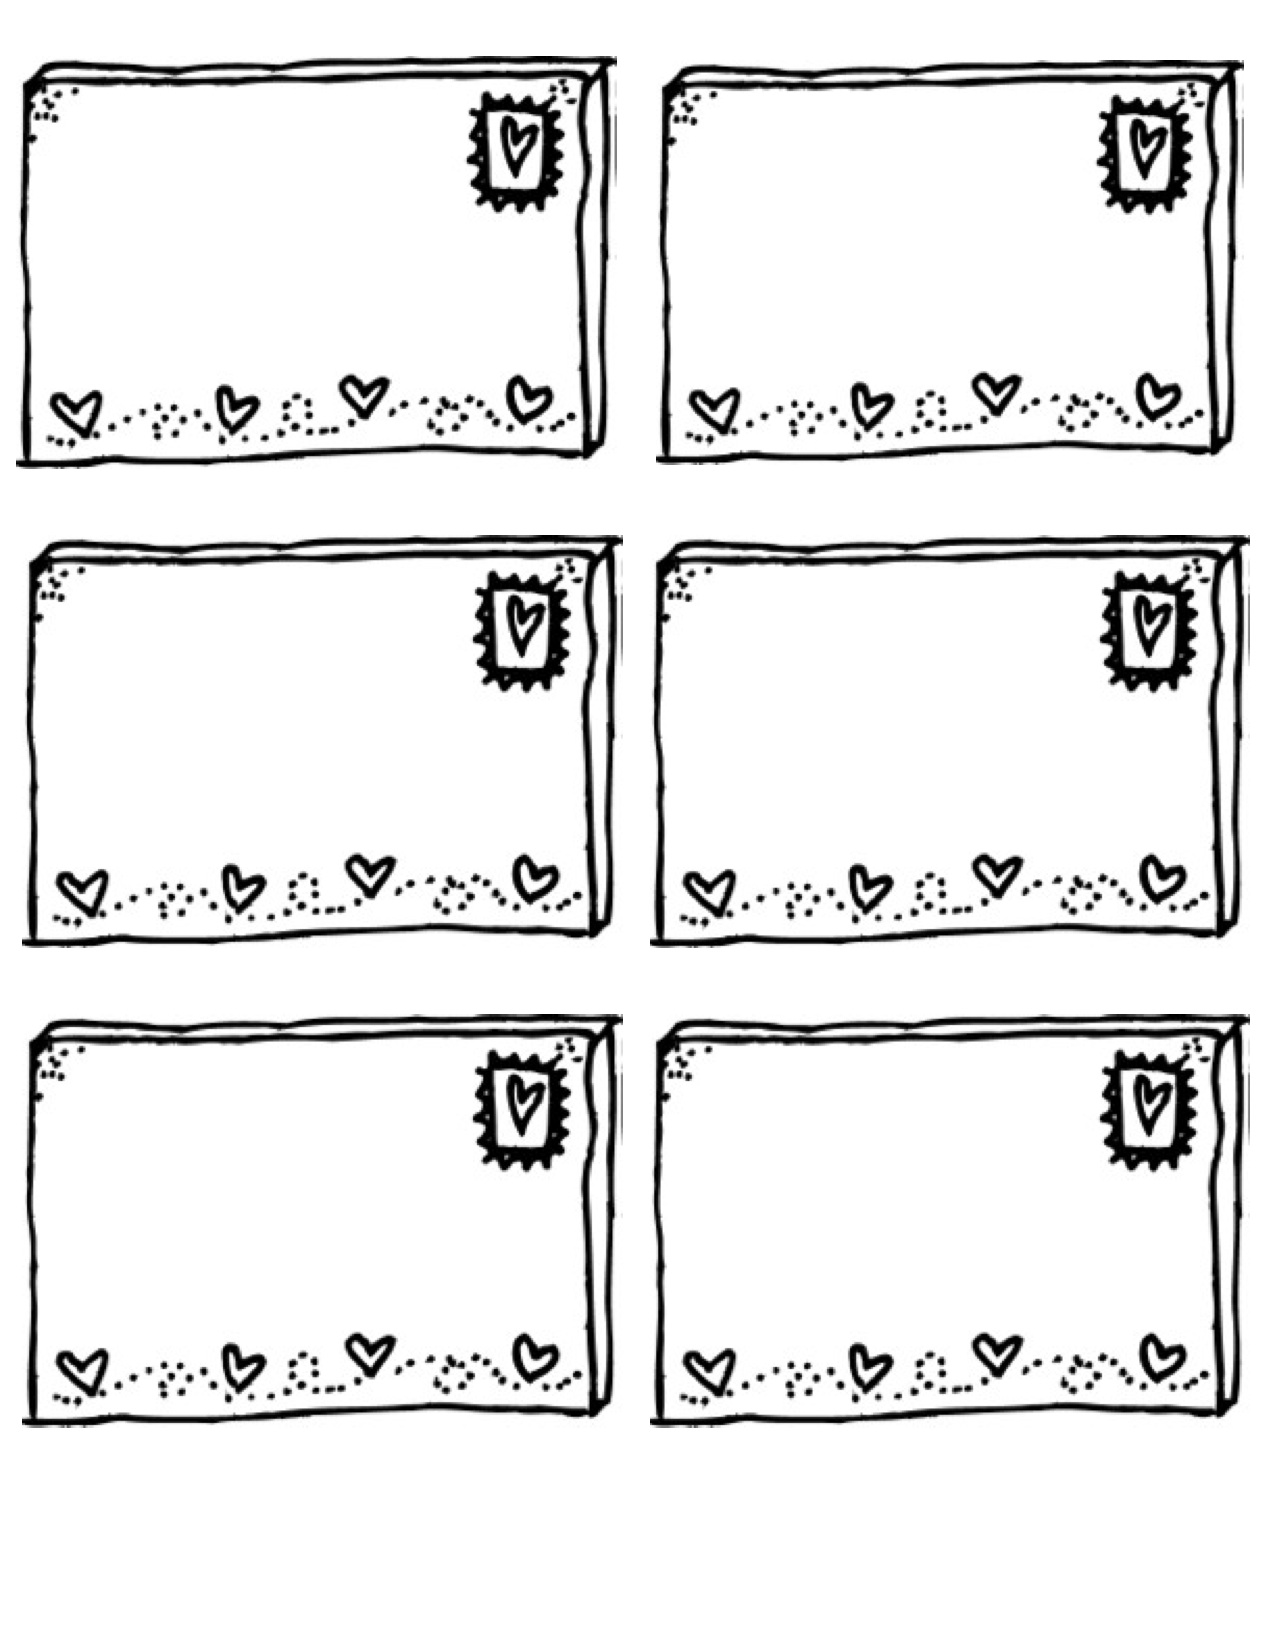 Love Letter Template For Him from dbsenk.files.wordpress.com